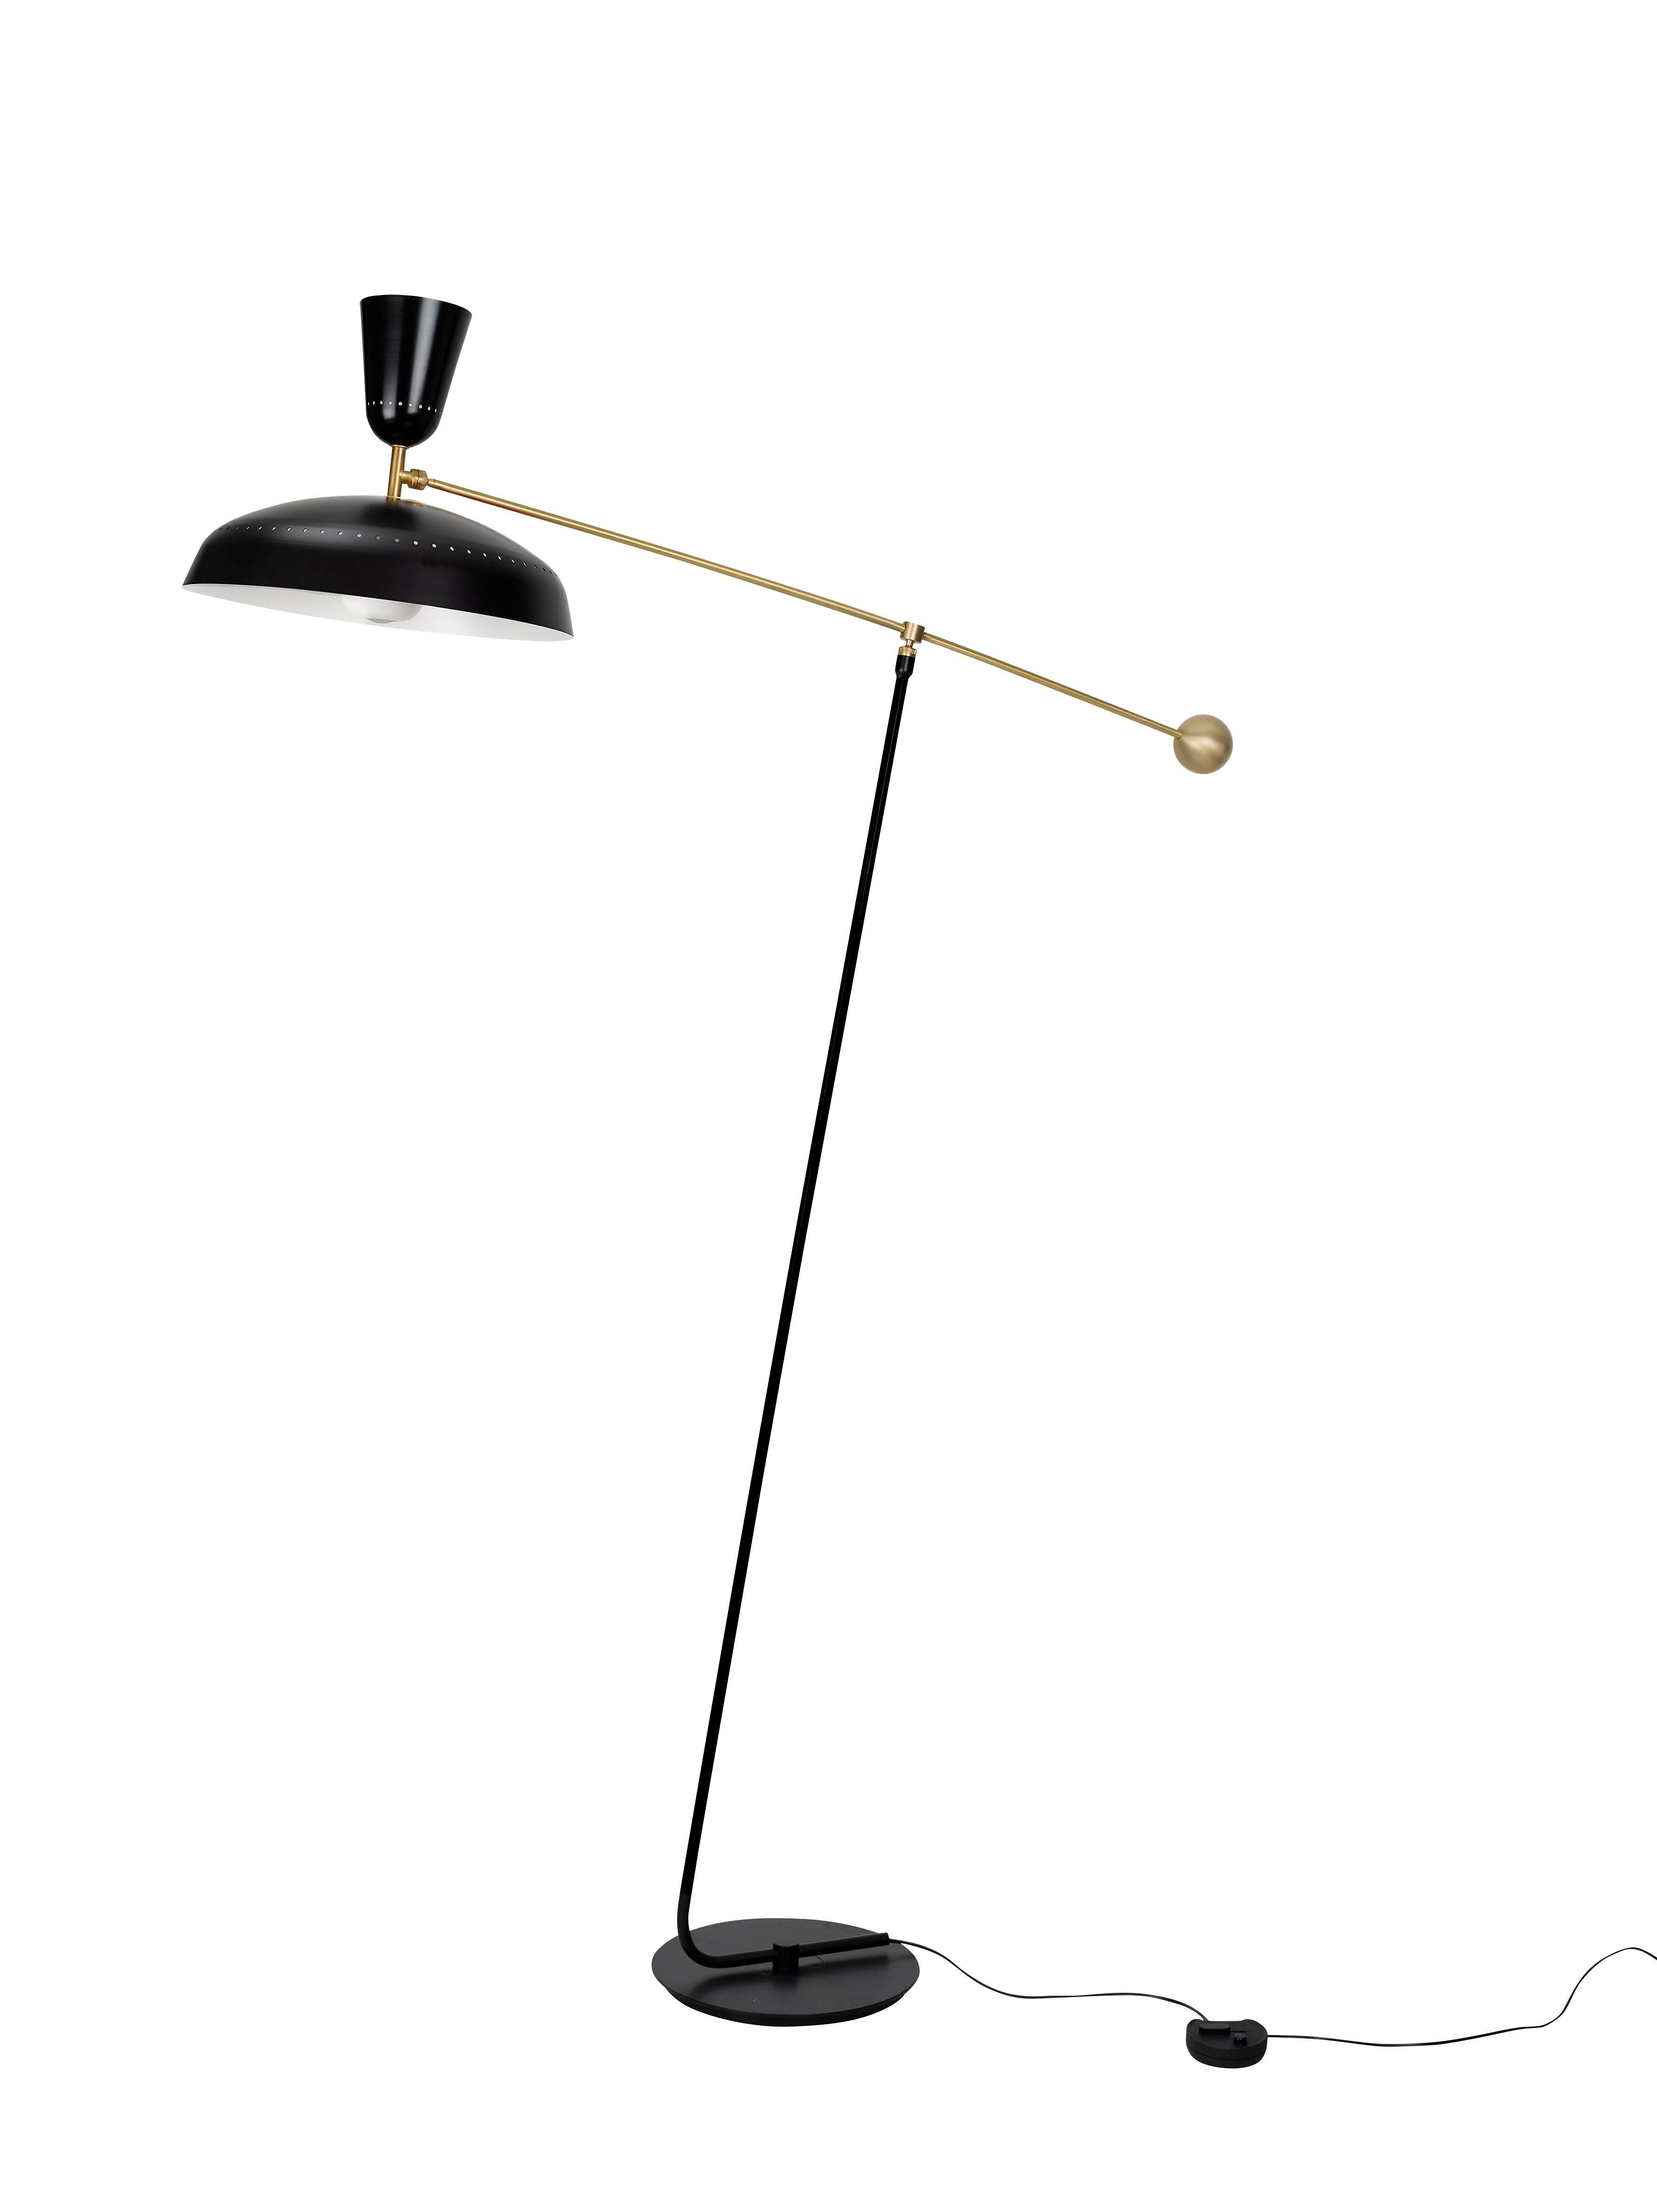 Contemporary Large Pierre Guariche 'G1' Floor Lamp for Sammode Studio in Chalk For Sale